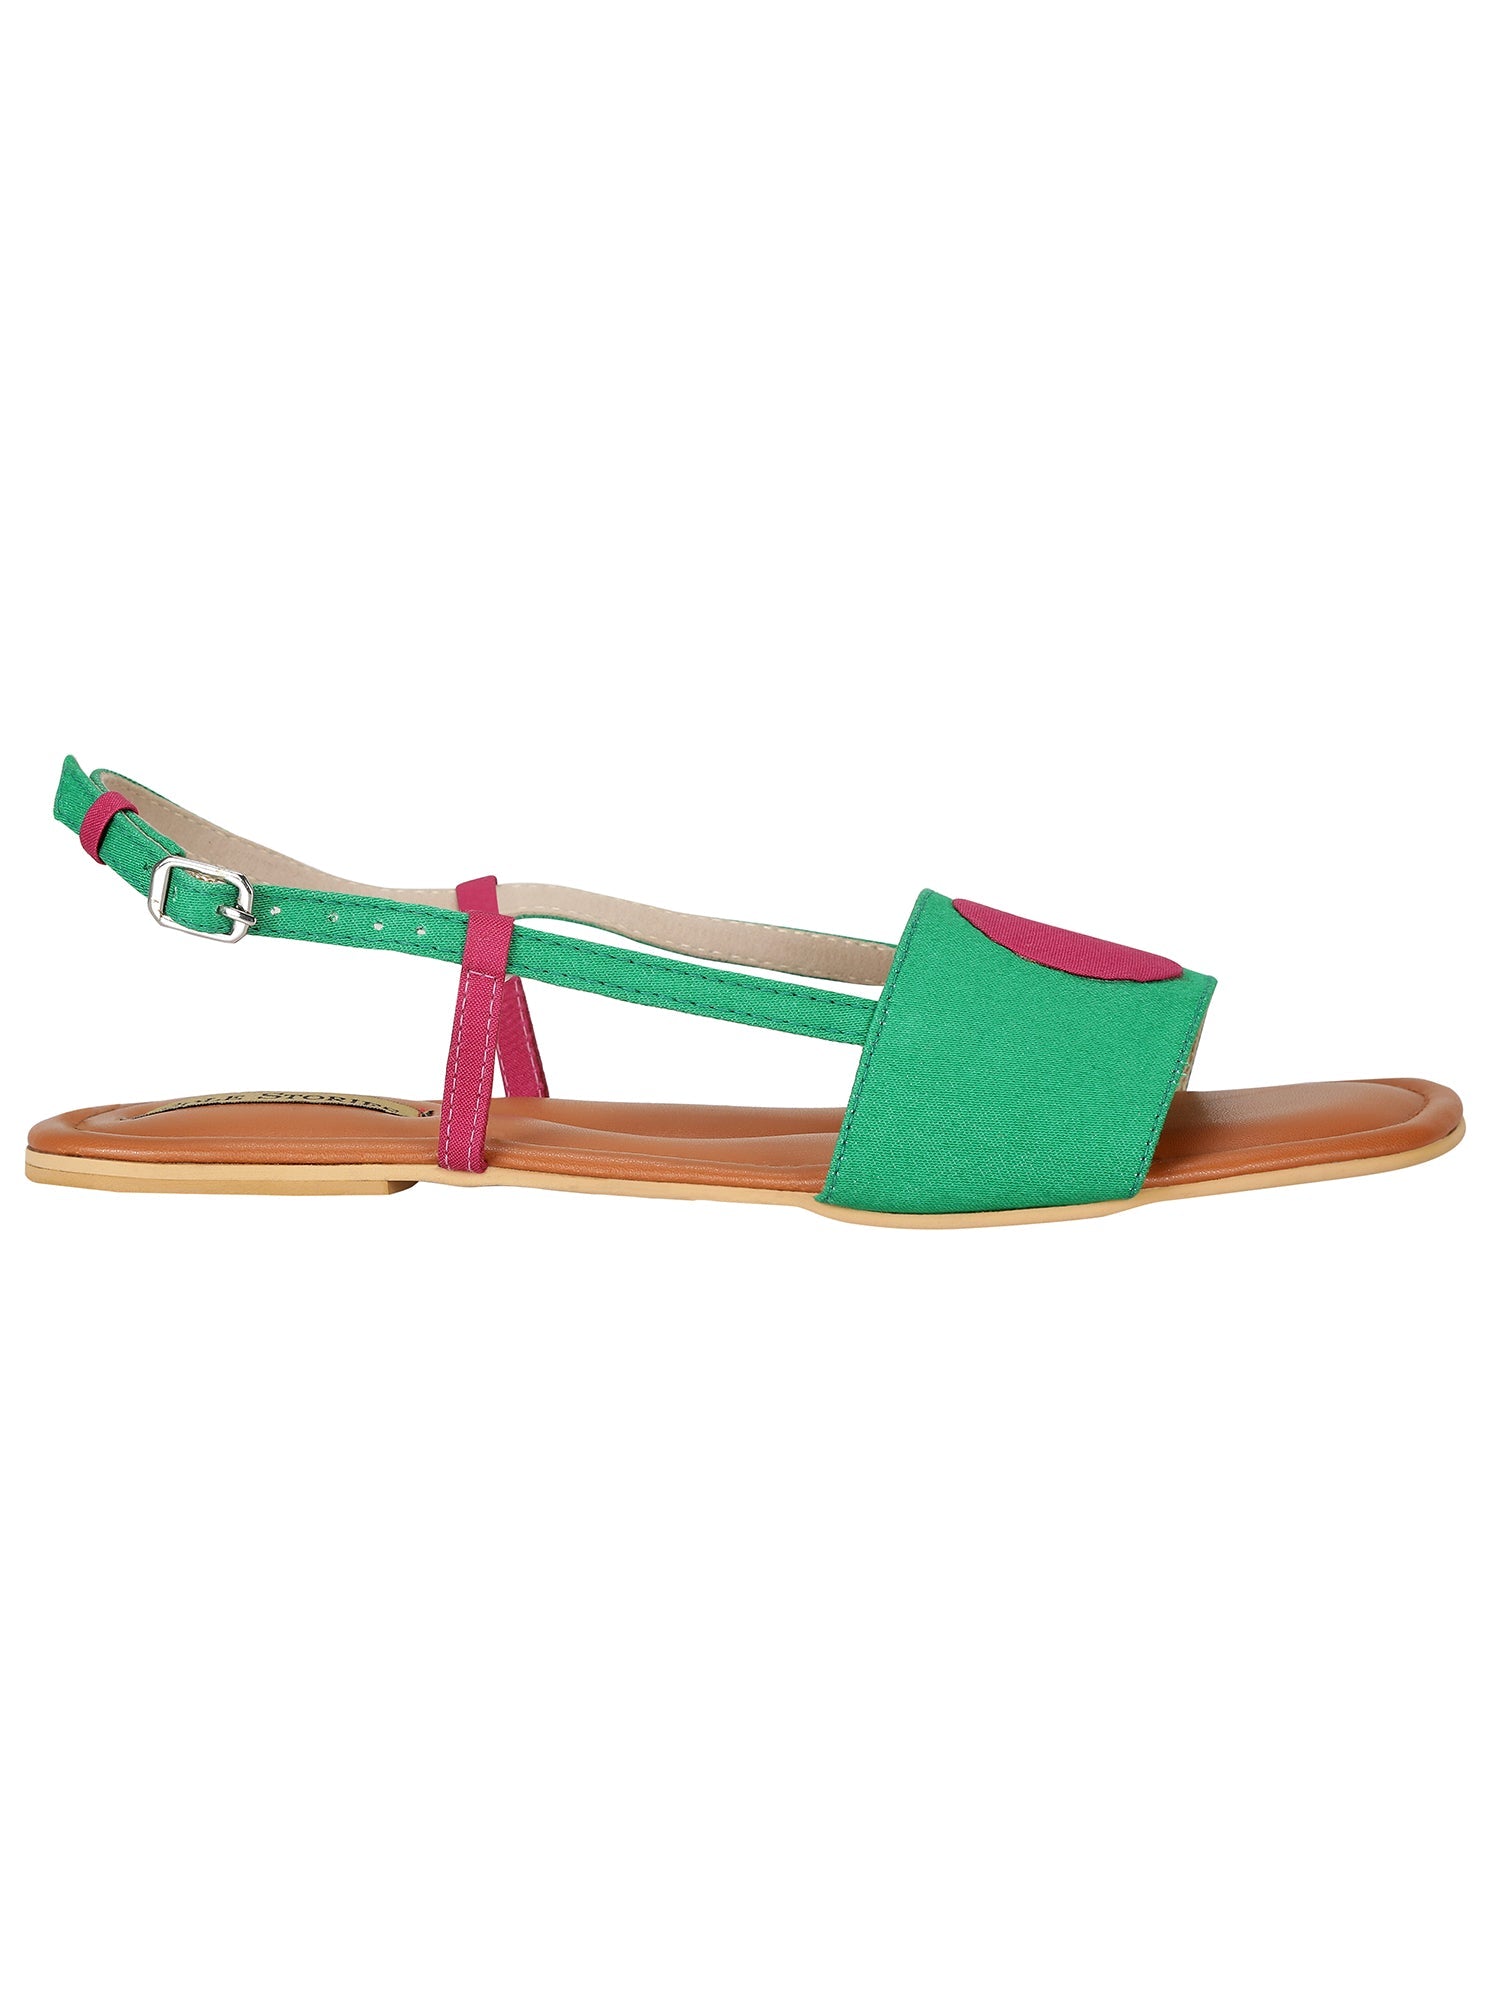 BINDI BACKSTRAPS IN GREEN AND PINK Footwear Basics Edit- Chapter II, Faux Leather, Flats, Green, Handcrafted, Pink, Relaxed Fit, Solids, Vegan SOLE STORIES Kamakhyaa